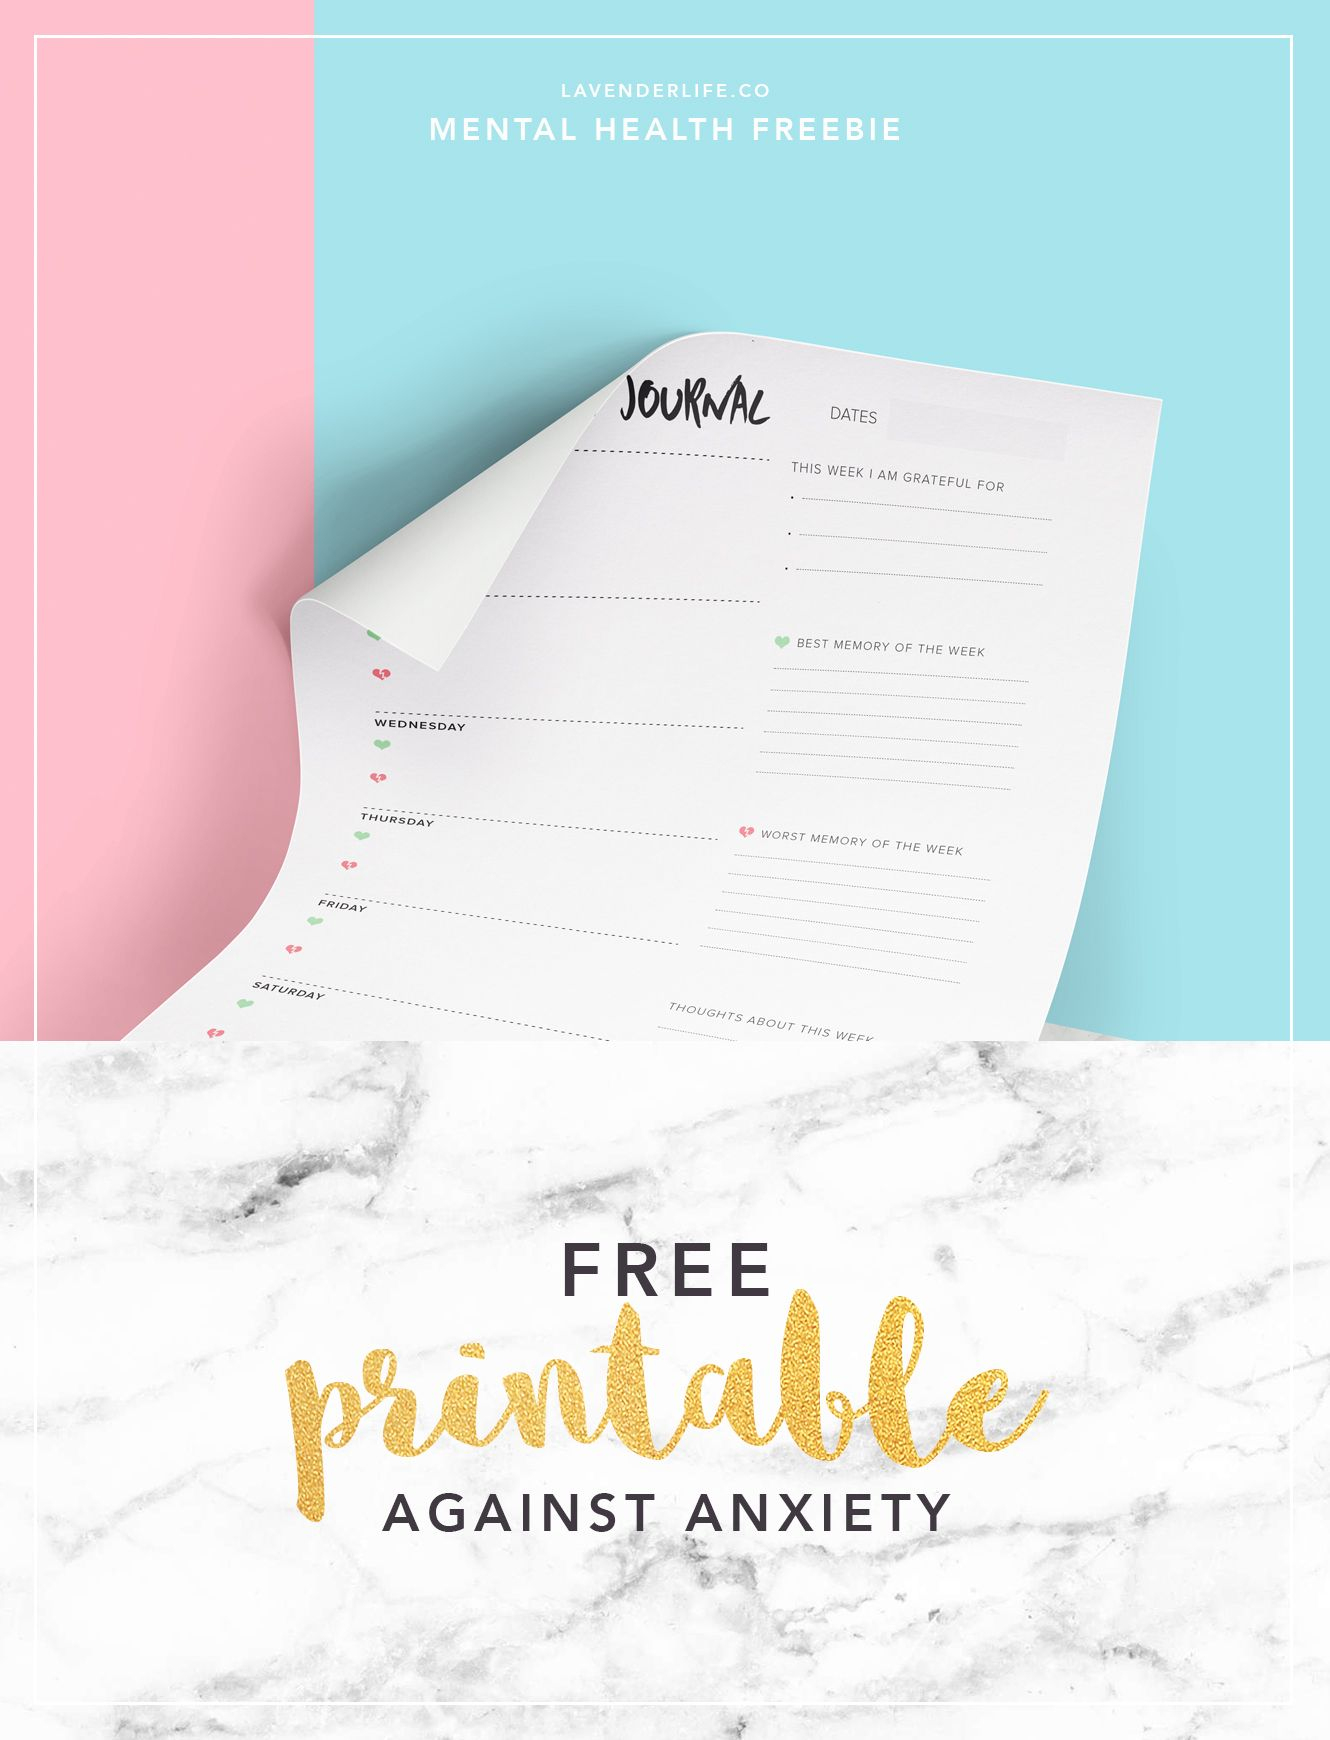 Free Printable To Help With Your Anxiety | Work Ideas | Pinterest - Free Printable Stress Test